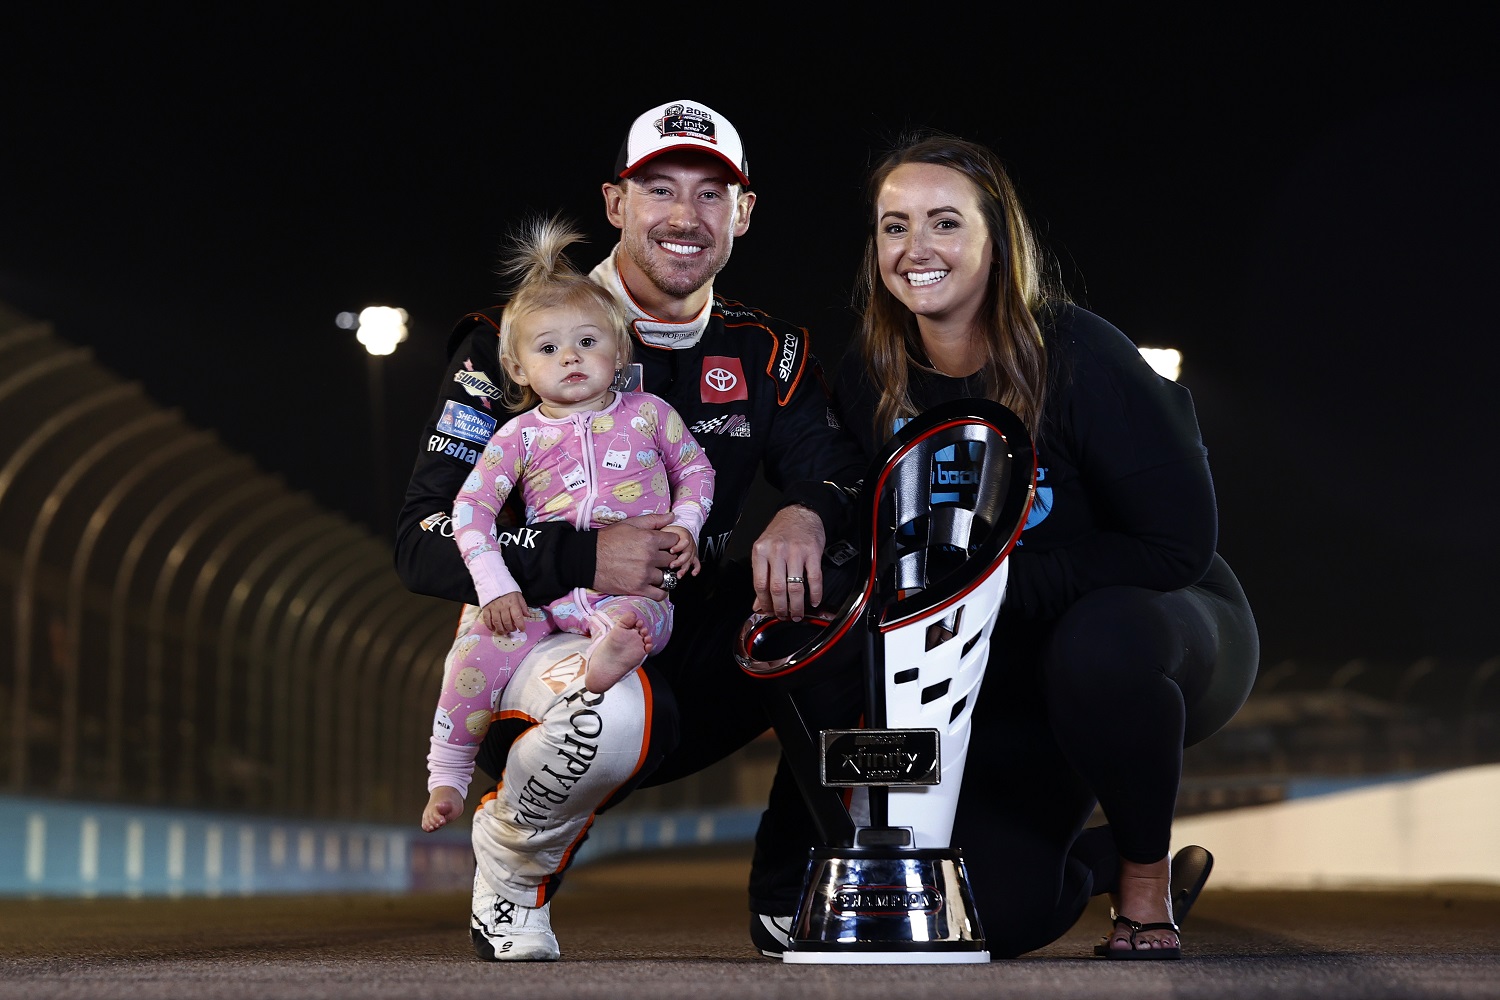 Daniel Hemric, driver of the No. 18 Toyota, poses for photos with his wife, Kenzie, and daughter, Rhen Haven, after winning the NASCAR Xfinity Series Championship at Phoenix Raceway on Nov. 6, 2021.